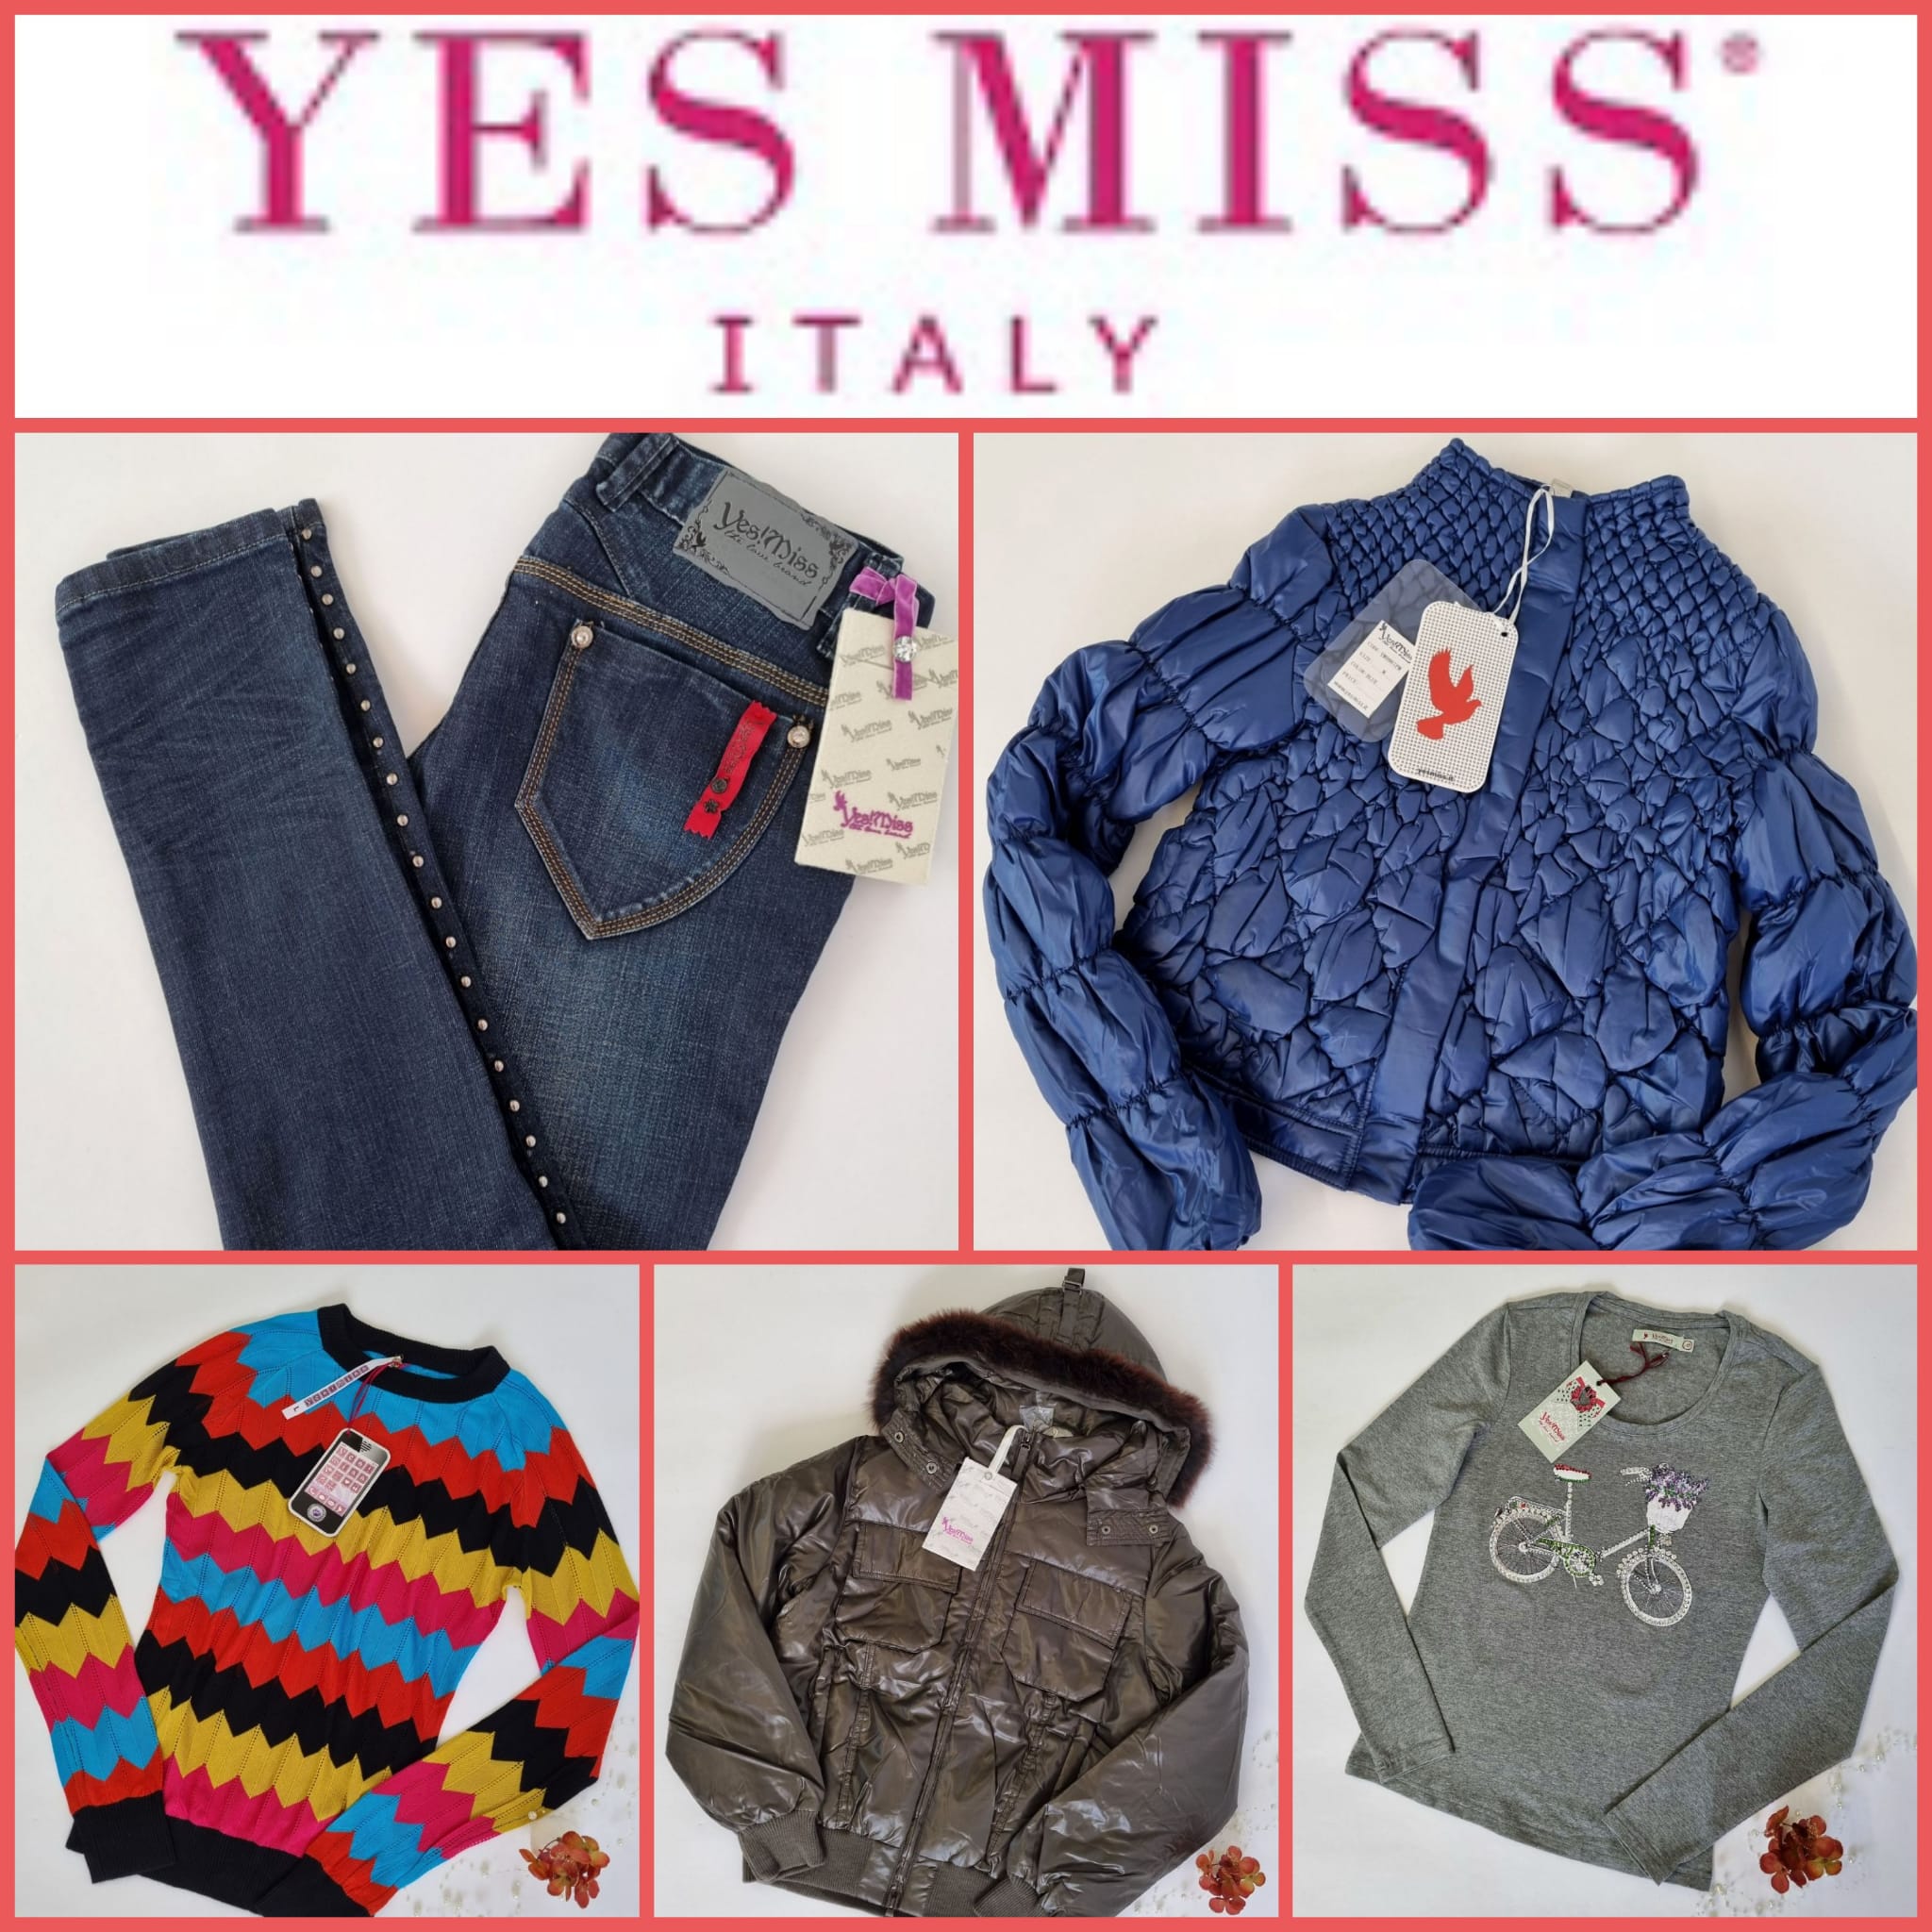 Our prices are the bomb!!! Women's clothing from Yes Miss